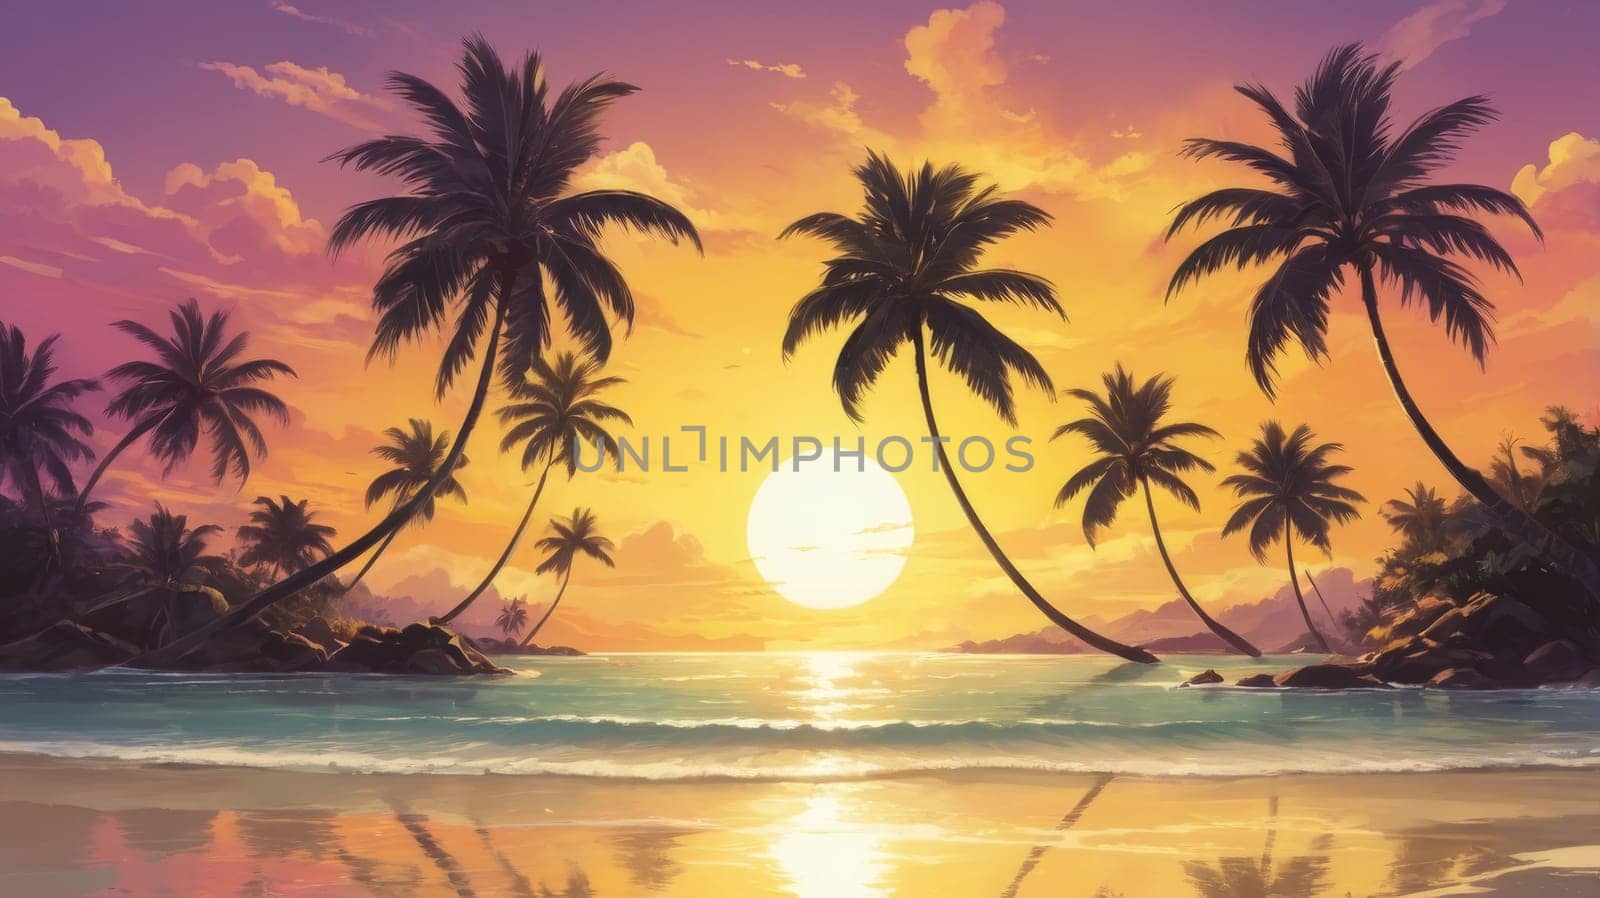 Landscape of paradise tropical island beach, sunrise sunset view. Exotic scenery, palm trees, soft sand and calm sea. Summer beach landscape, vacation or tropical travel sunset colors clouds horizon by Ekaterina34